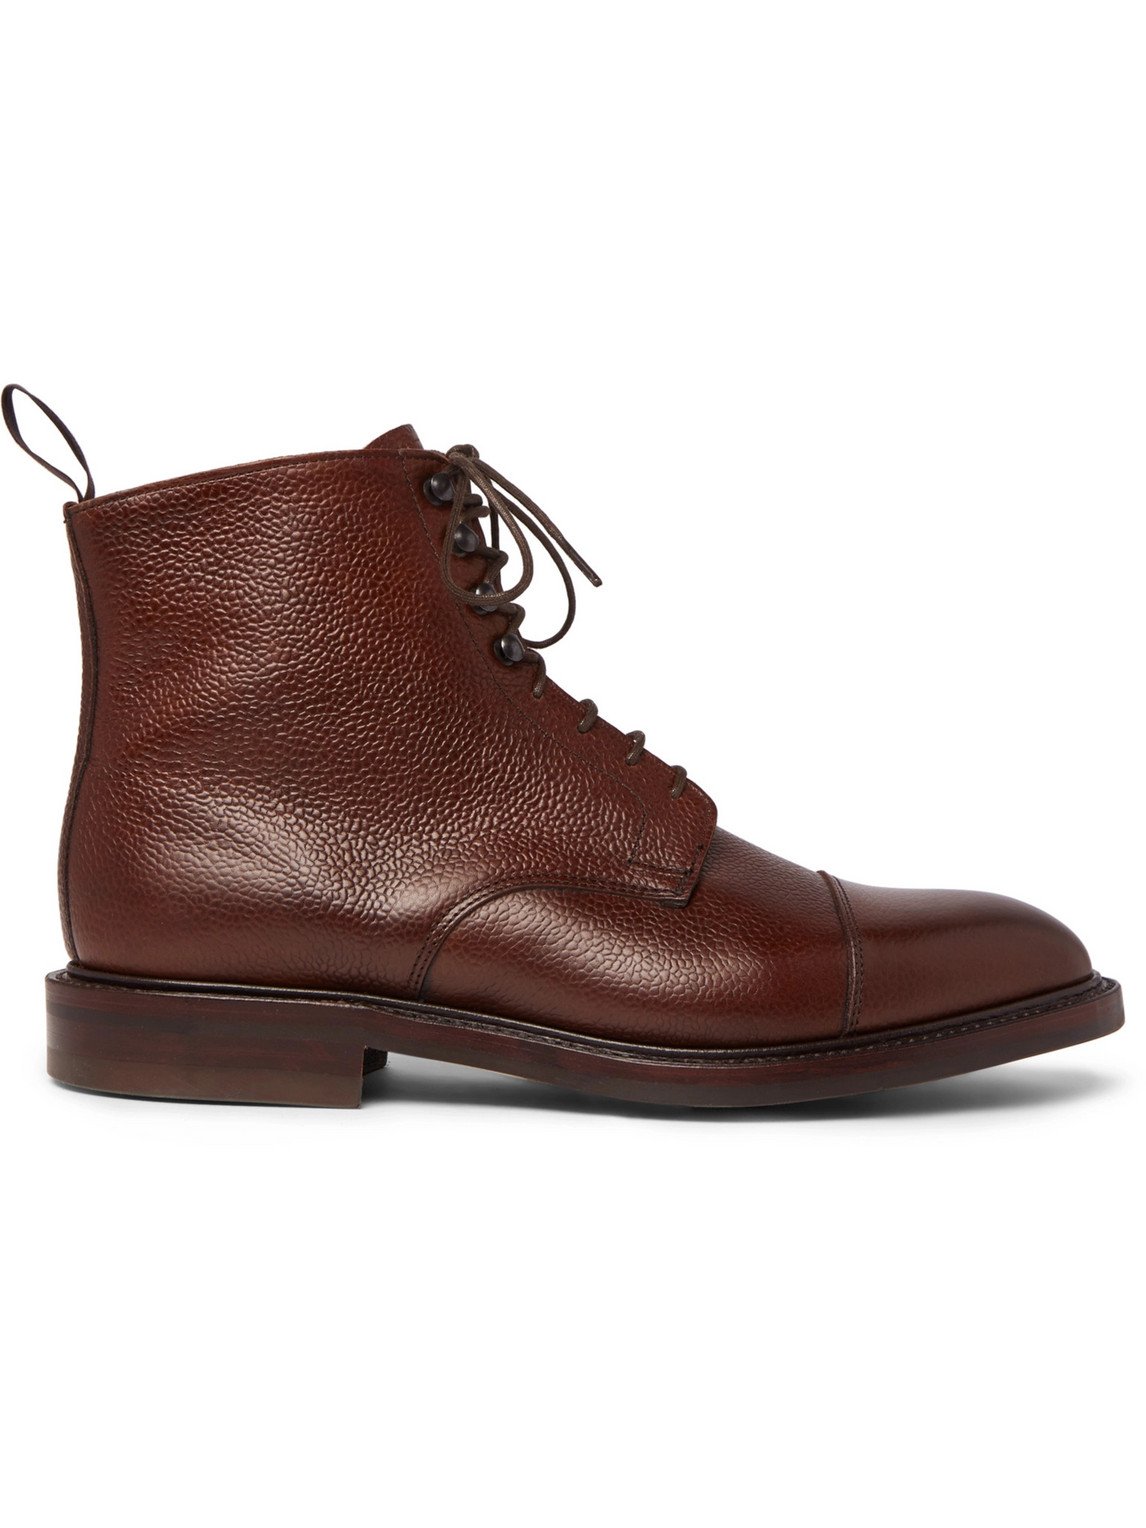 George Cleverley Cap-Toe Pebble-Grain Leather Boots